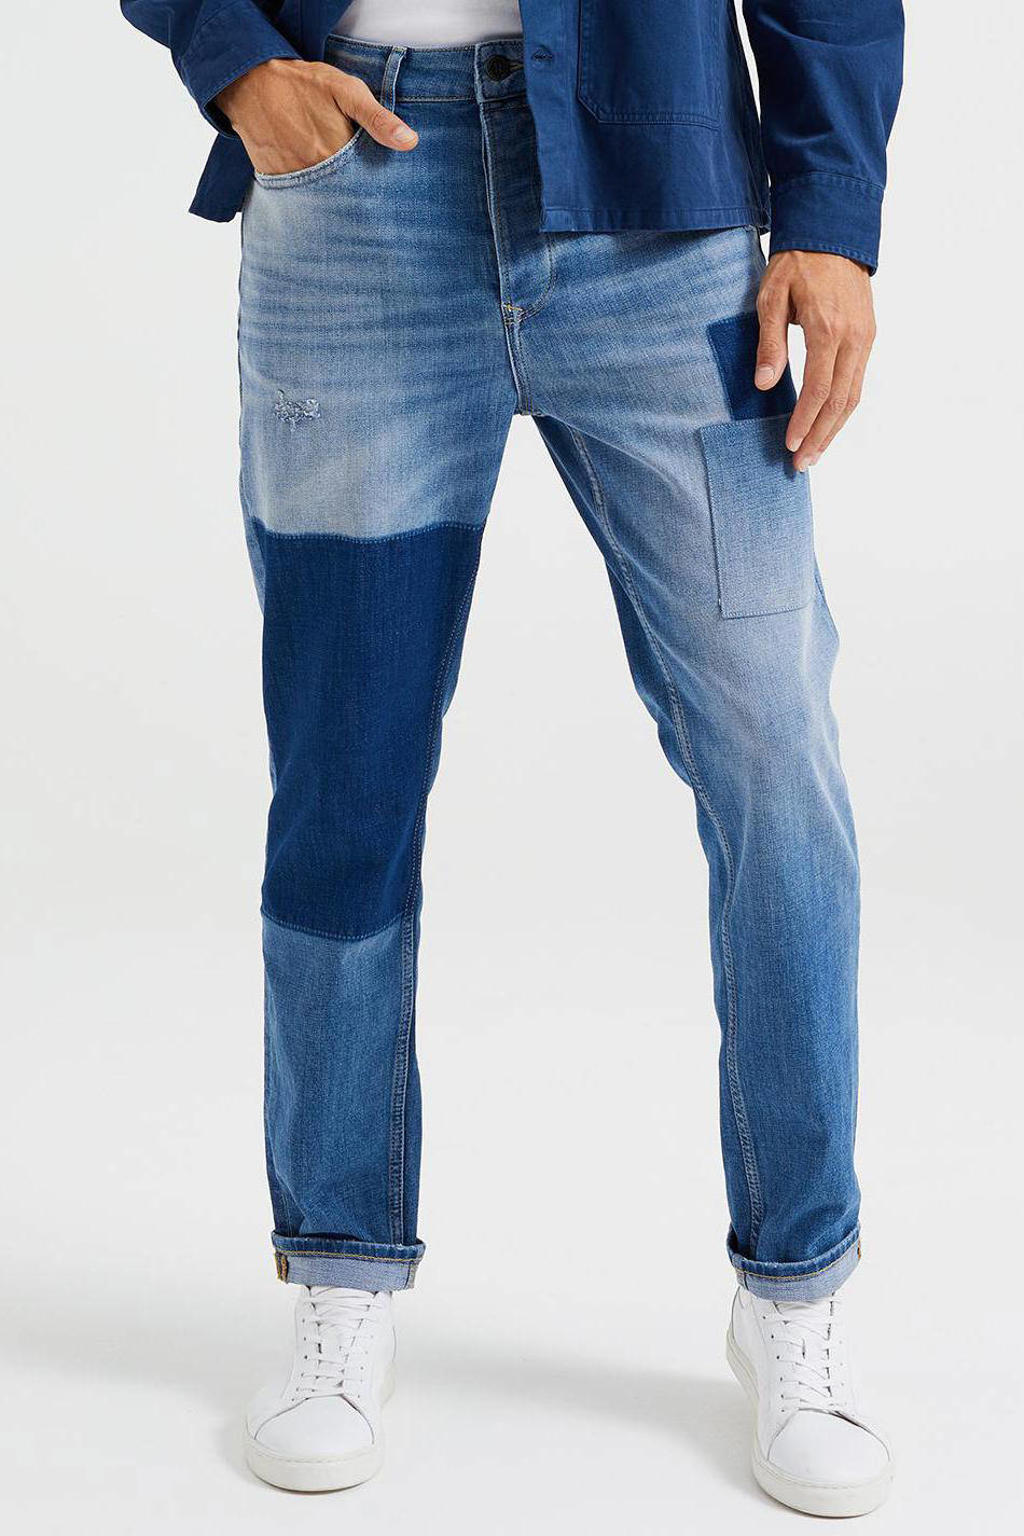 WE Fashion tapered fit jeans blue denim